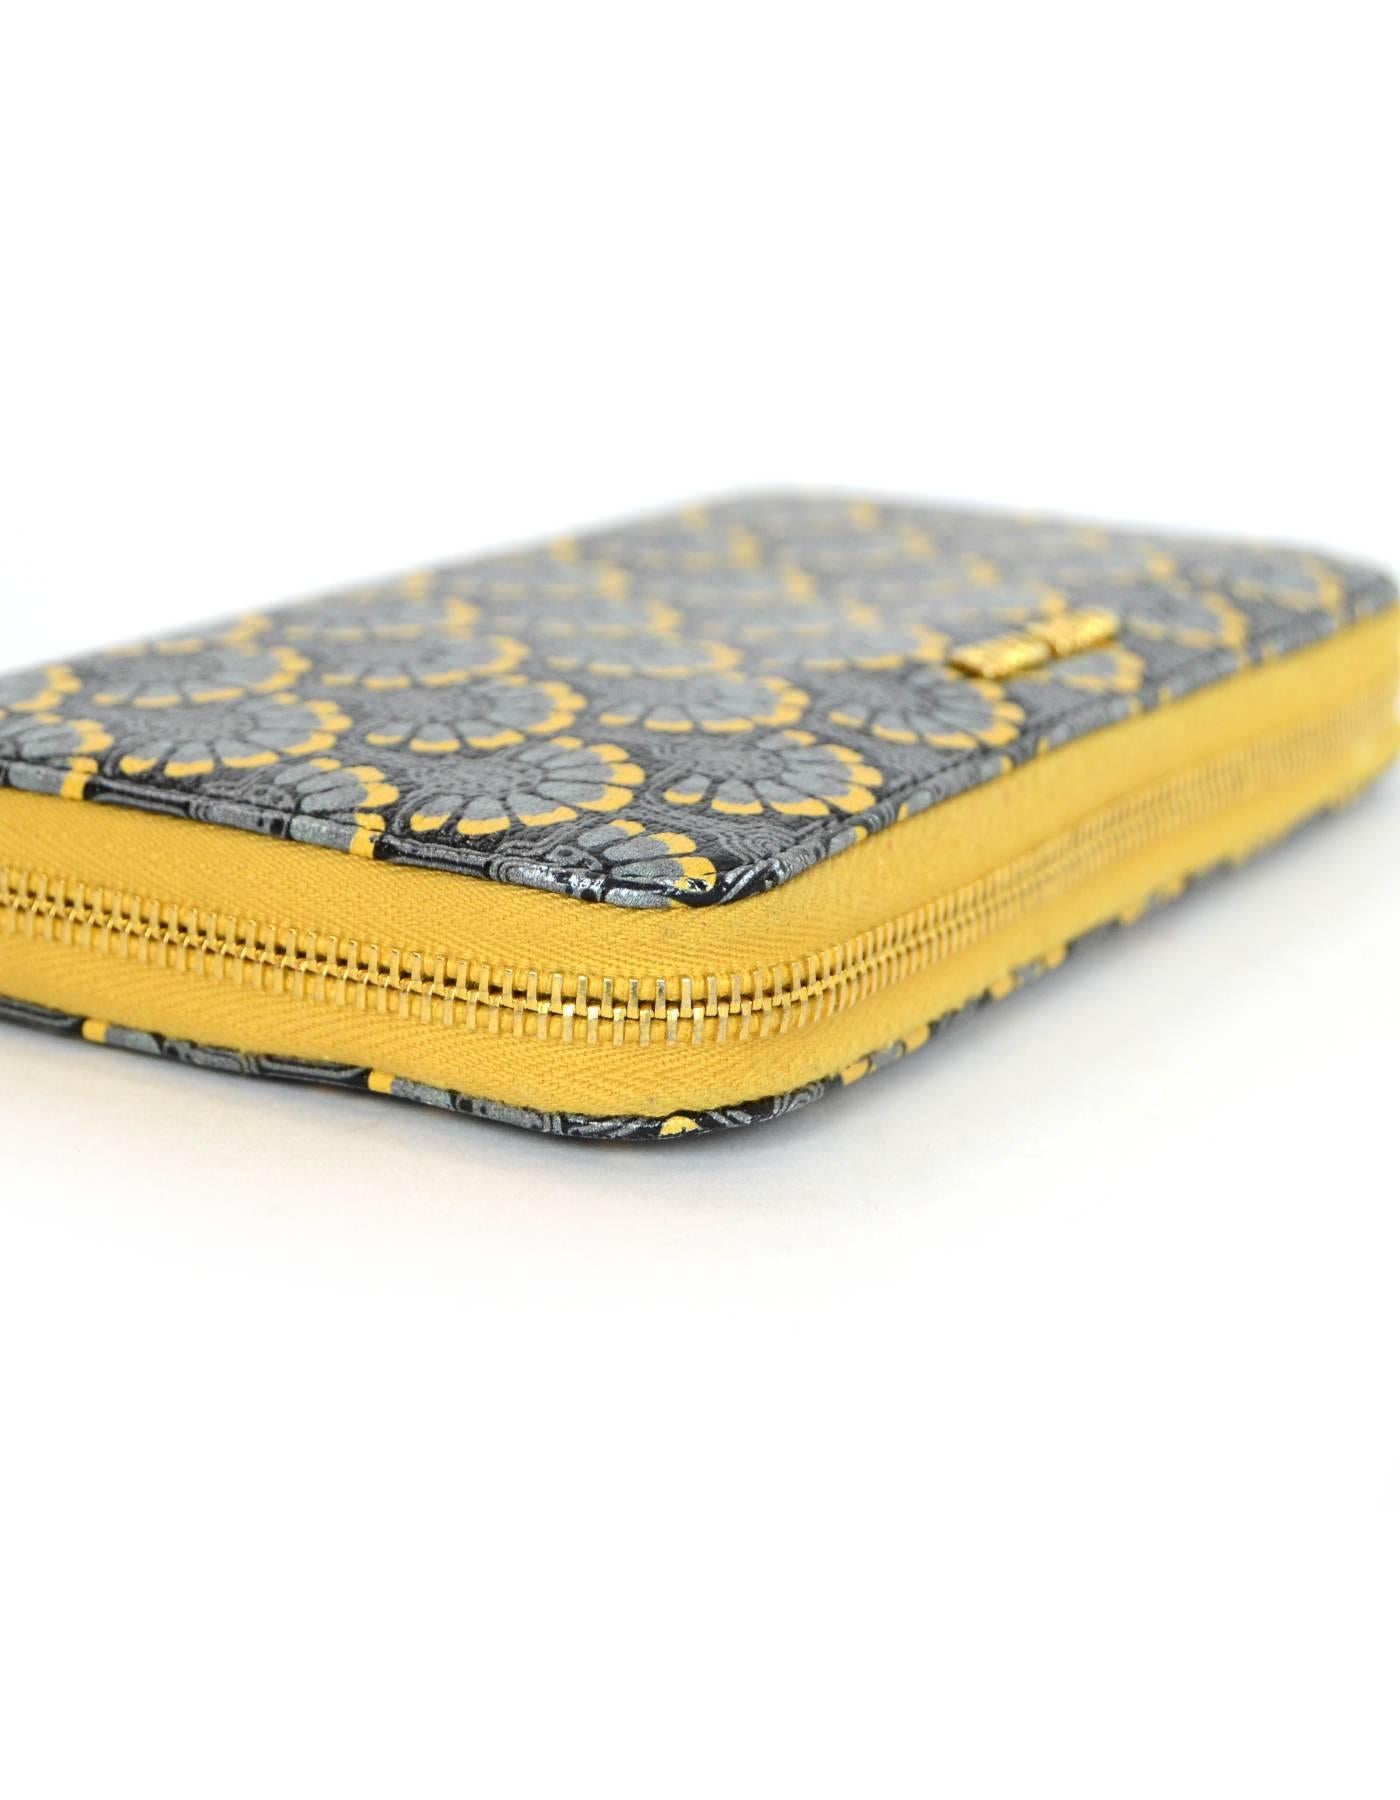 Miu Miu Blue & Yellow Floral Zip Wallet with Box In Excellent Condition In New York, NY